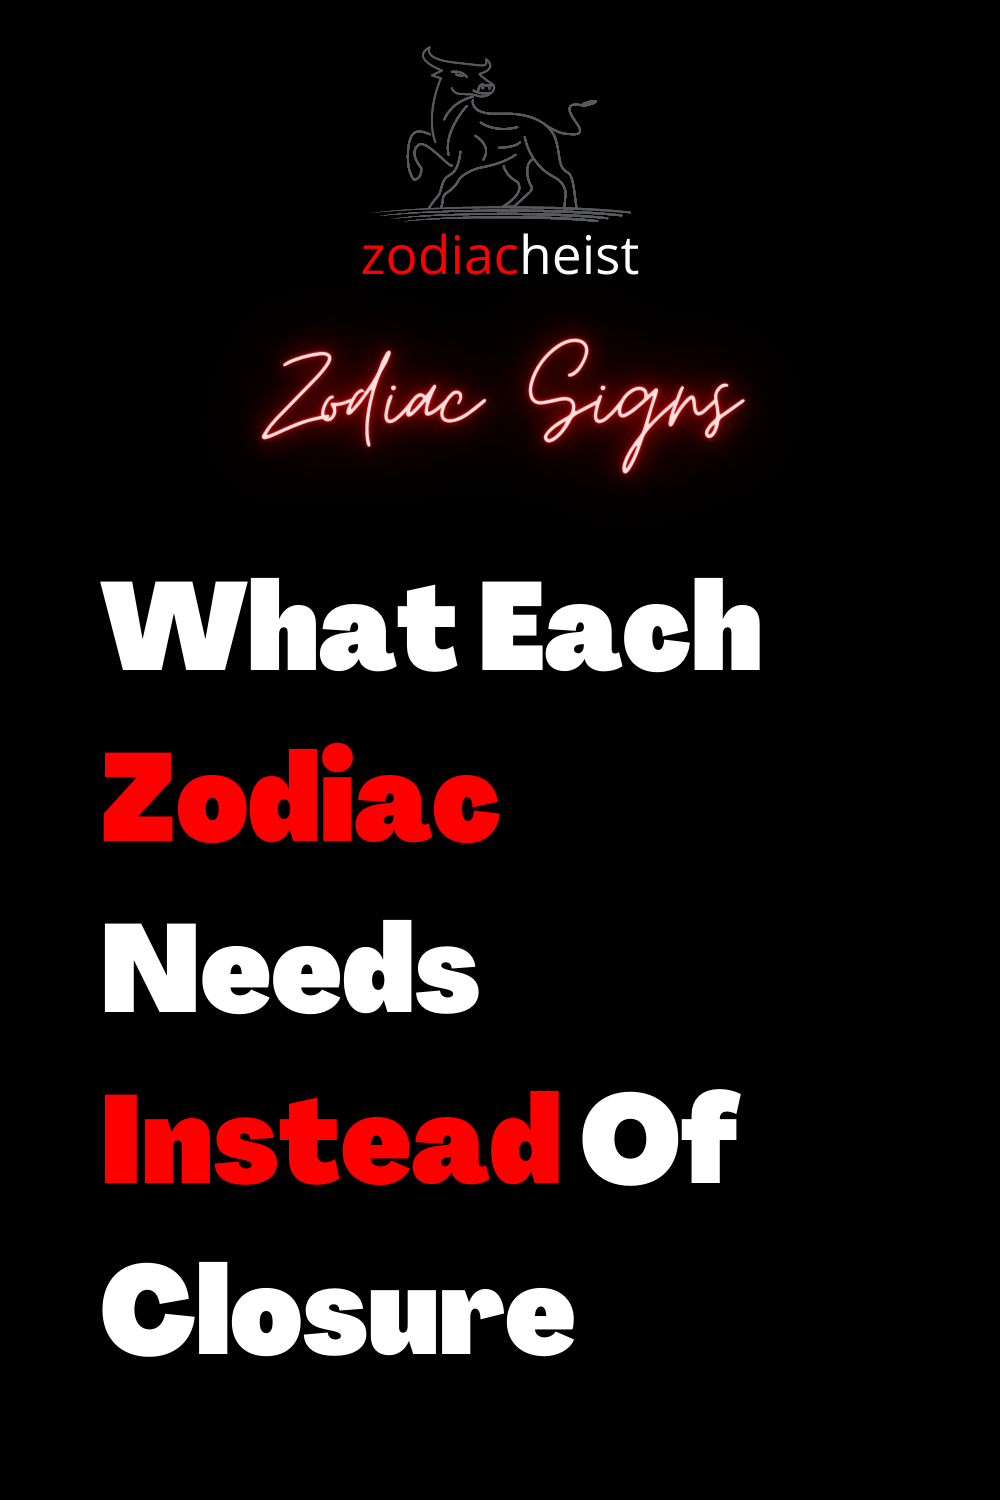 What Each Zodiac Needs Instead Of Closure